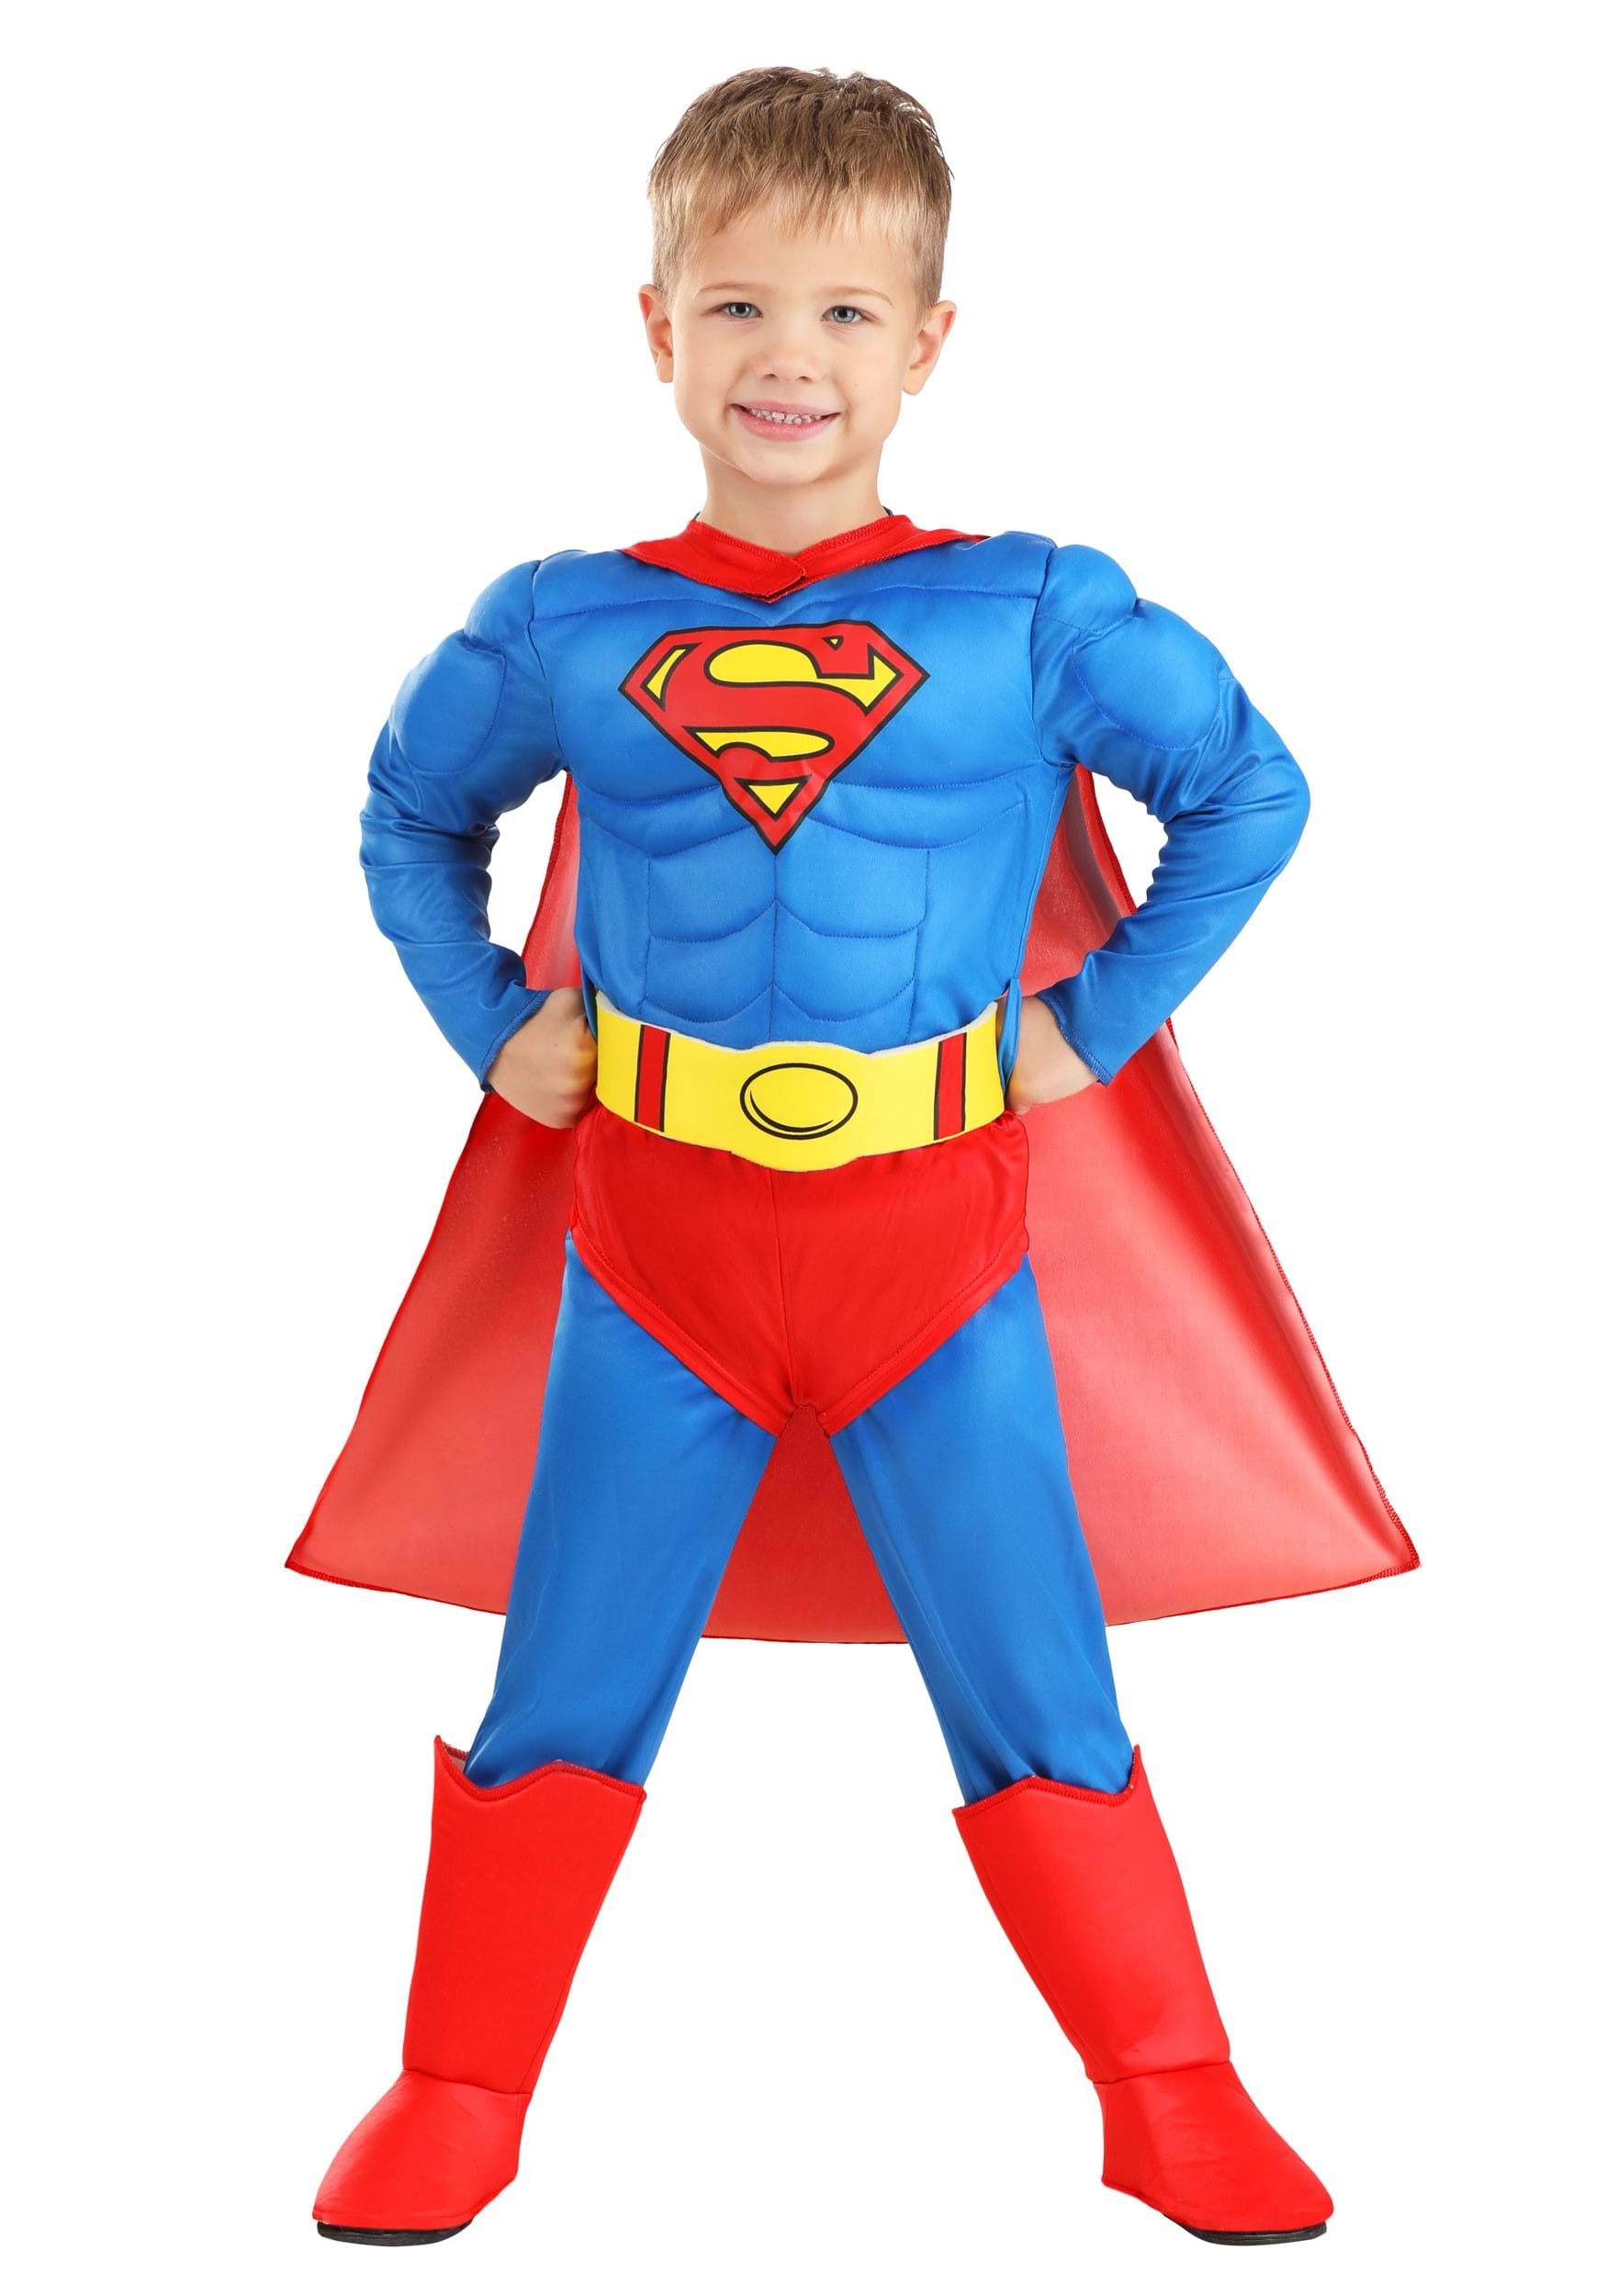 Superman Deluxe Classic Toddler Costume